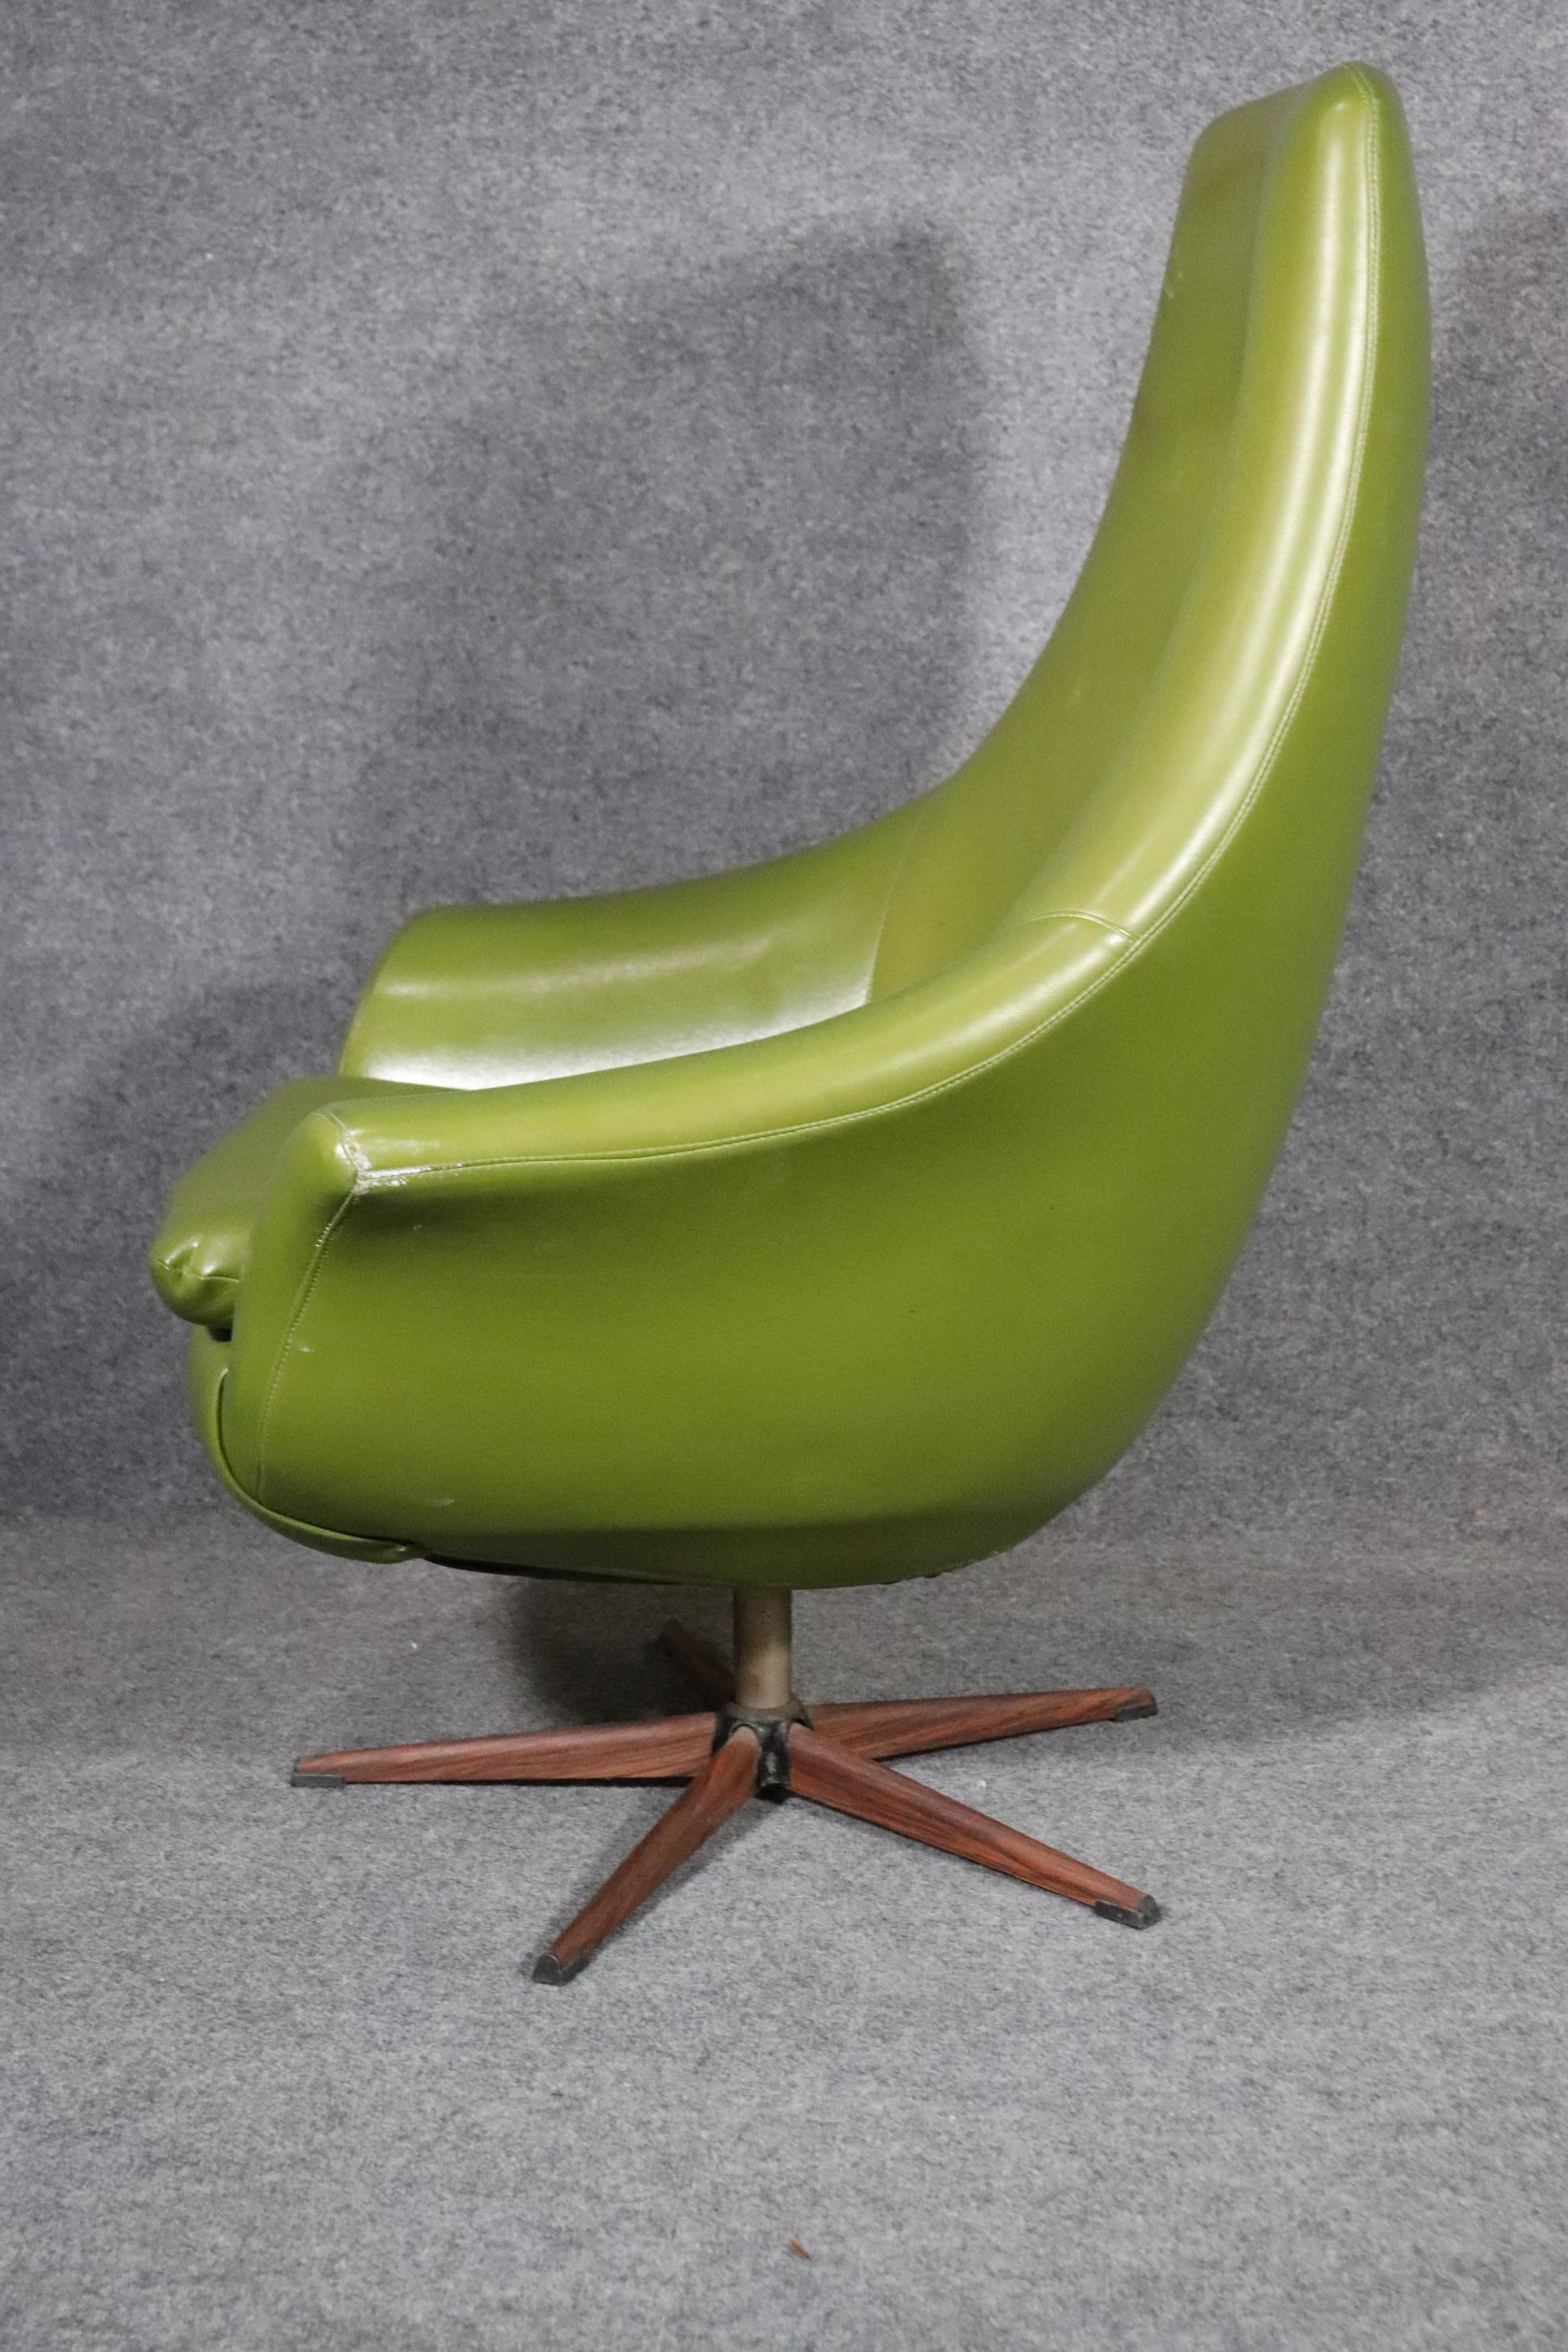 Mid-Century Modern Midcentury Swivel Lounge Chair For Sale